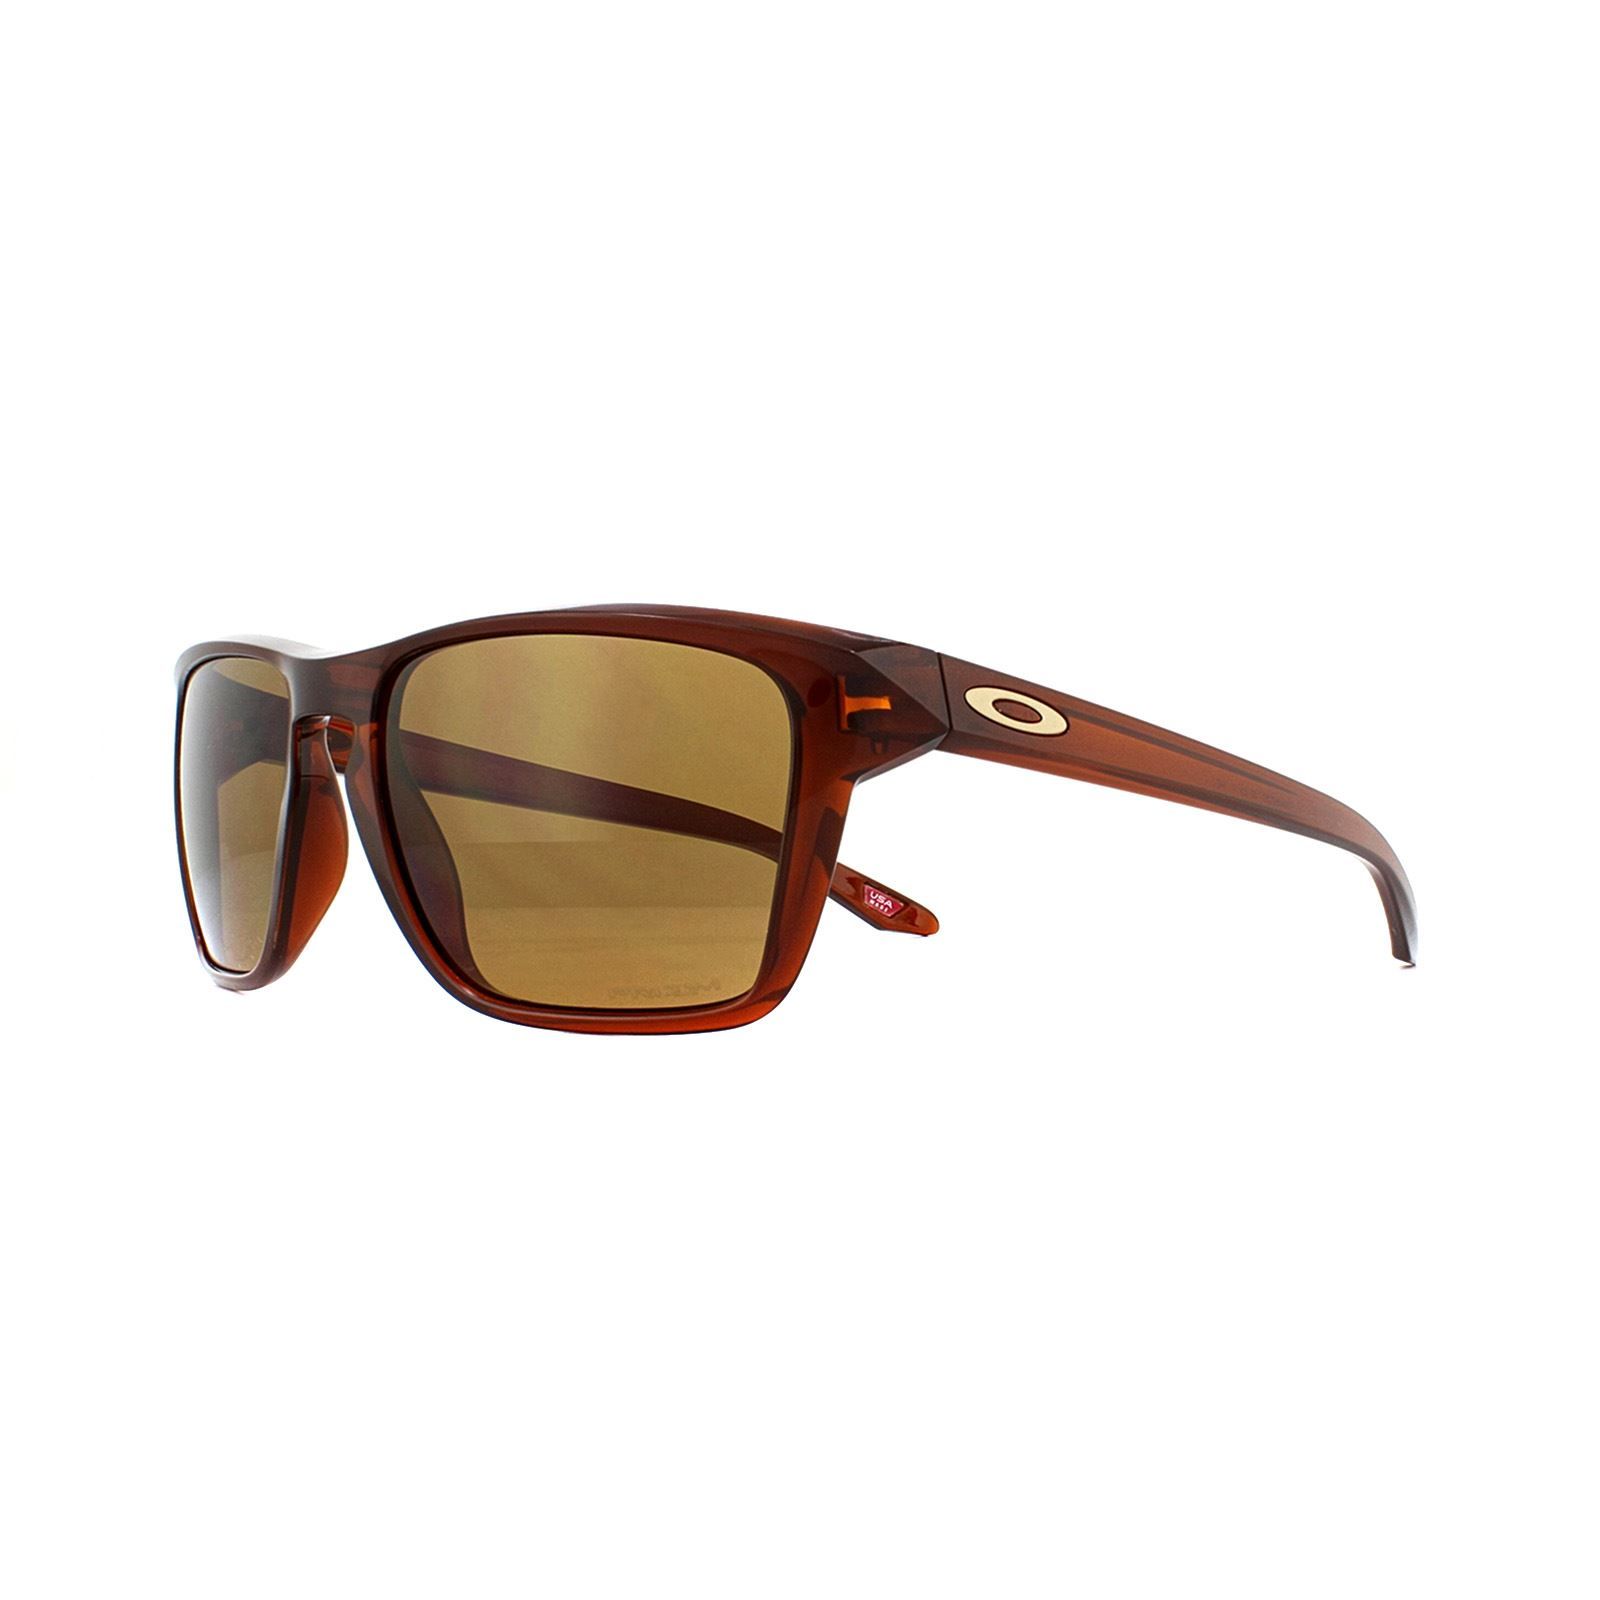 Oakley Sunglasses Sylas OO9448-02 Polished Rootbeer Prizm Bronze are a classic frame with Oakley's reliable design features for optimum comfort, the Three-Point fit and O Matter frame. Versatile and perfect for all-day wear, the Sylas is also a hat compatible design!